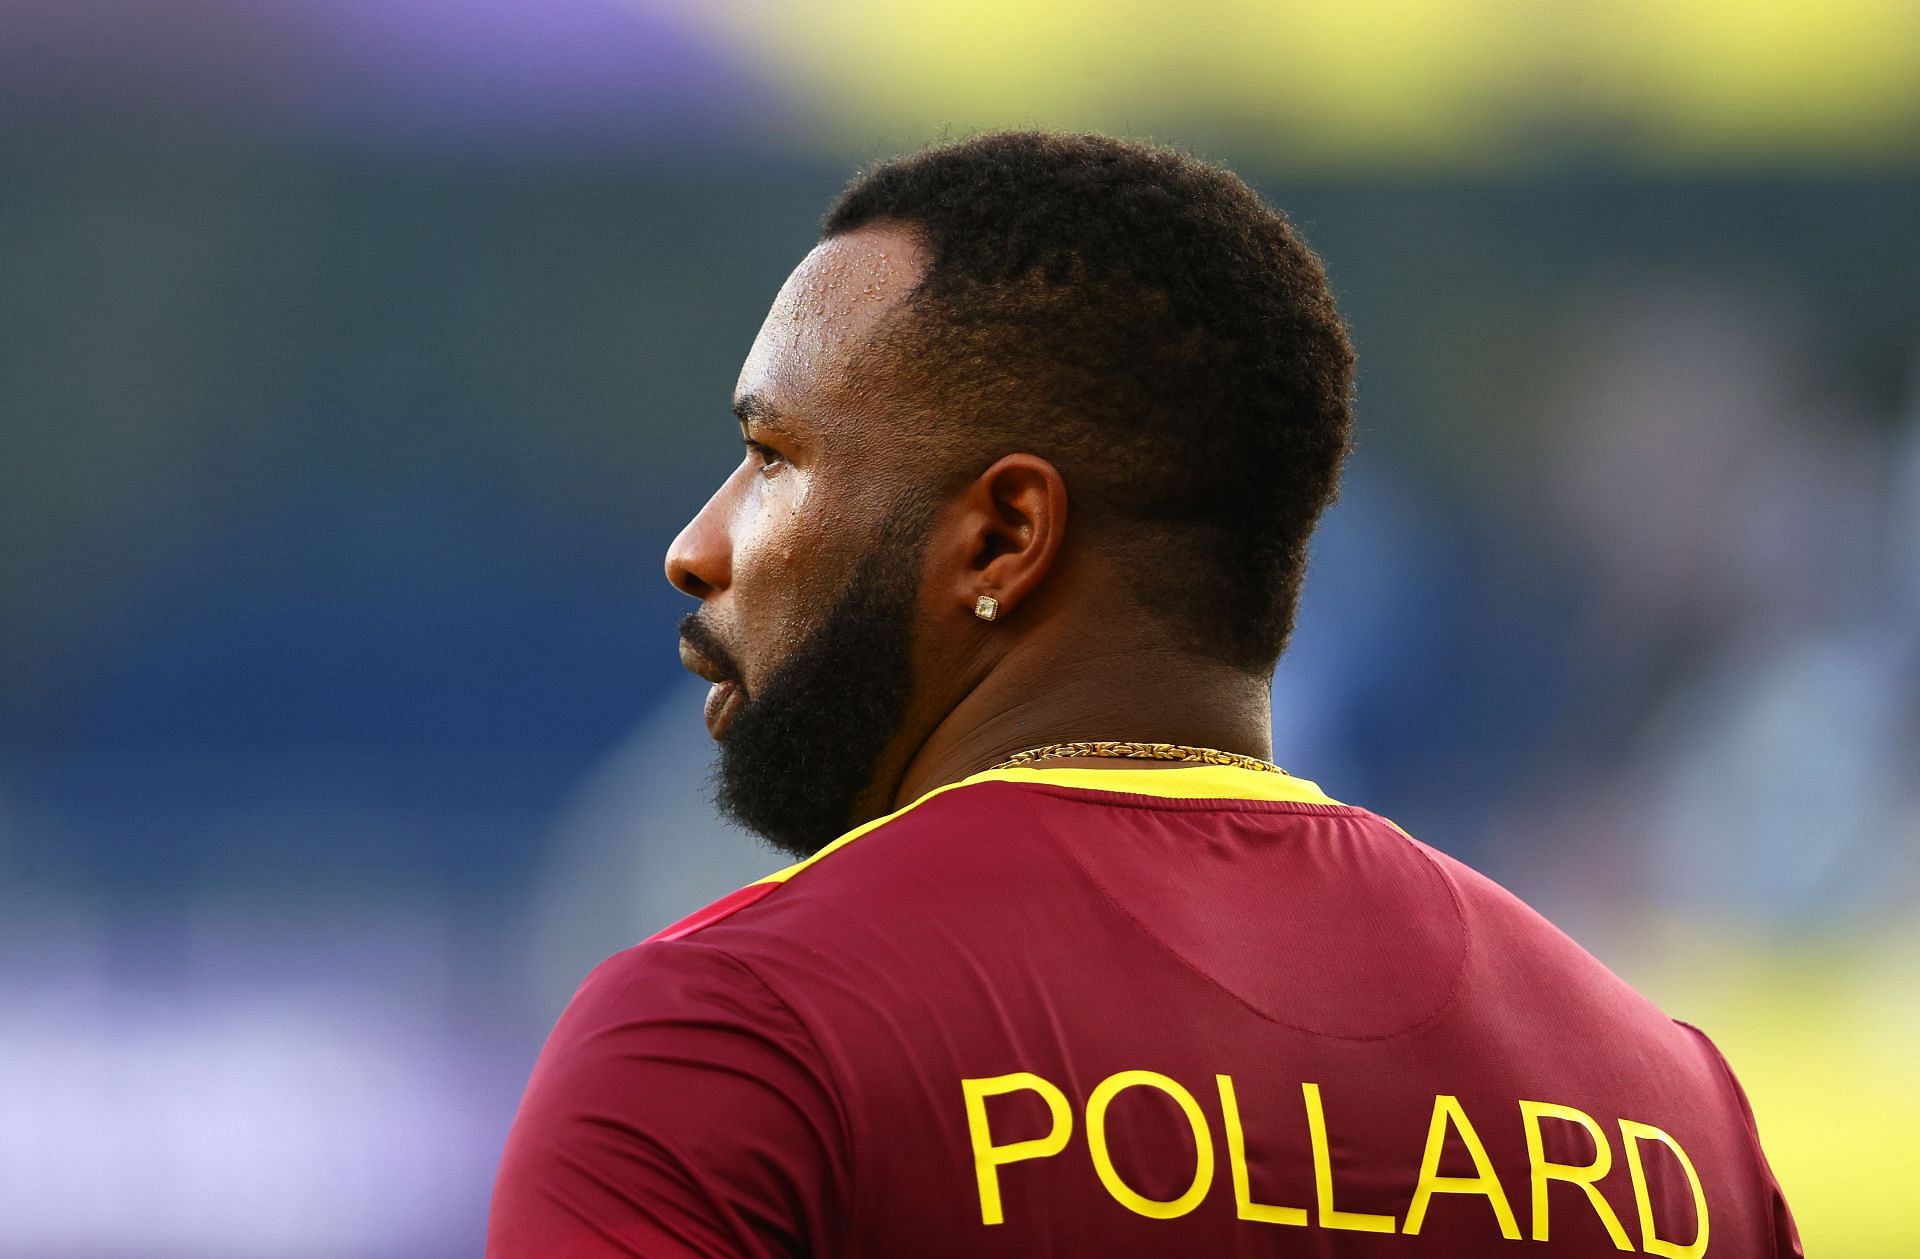 Kieron Pollard can become the captain of a team in IPL 2022